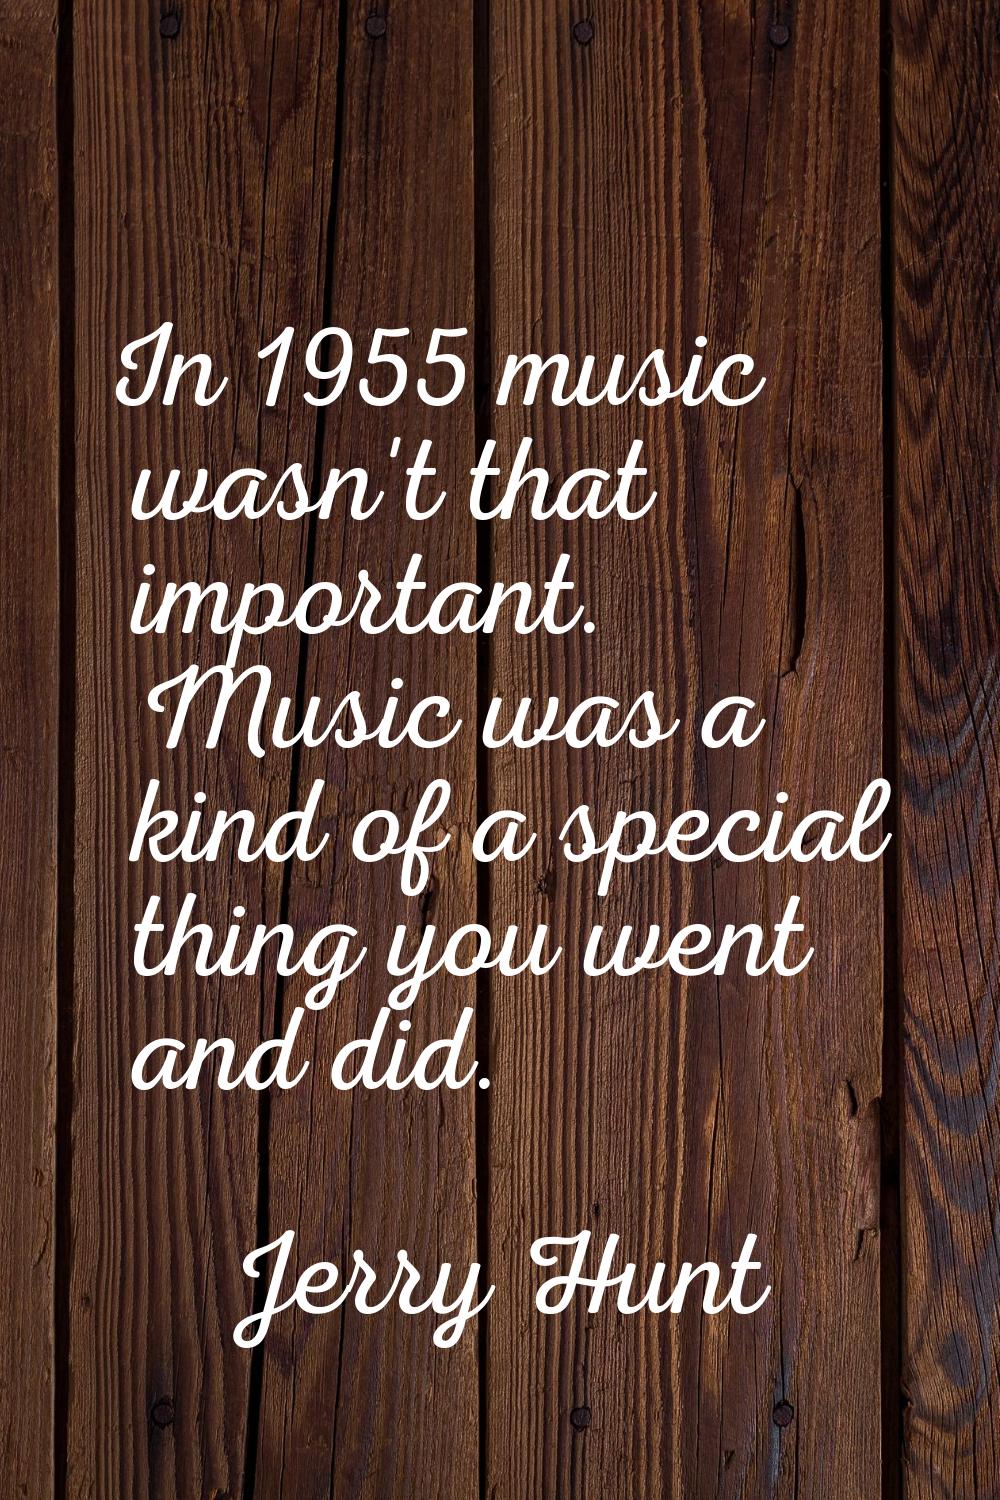 In 1955 music wasn't that important. Music was a kind of a special thing you went and did.